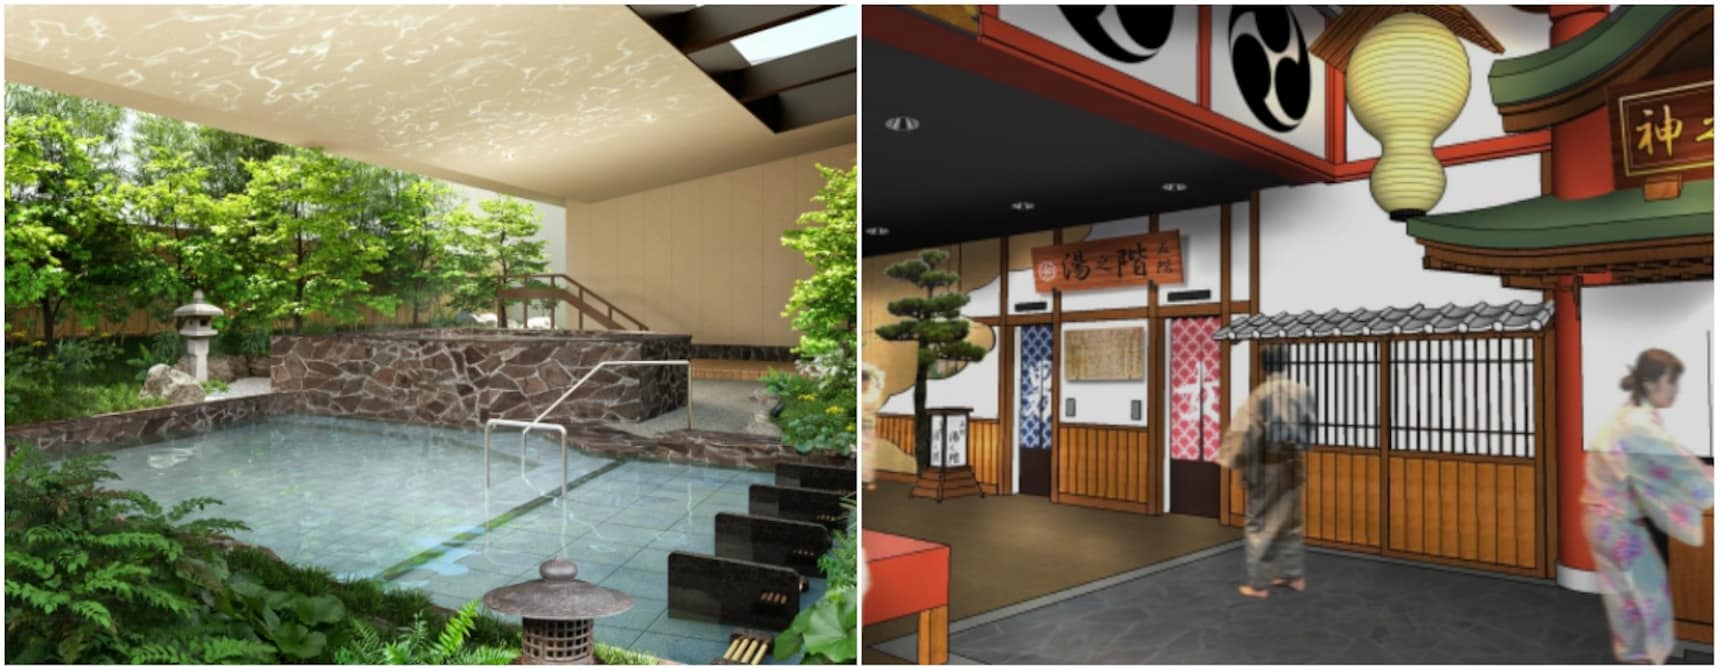 Huge Hot Spring Theme Park Coming to Osaka